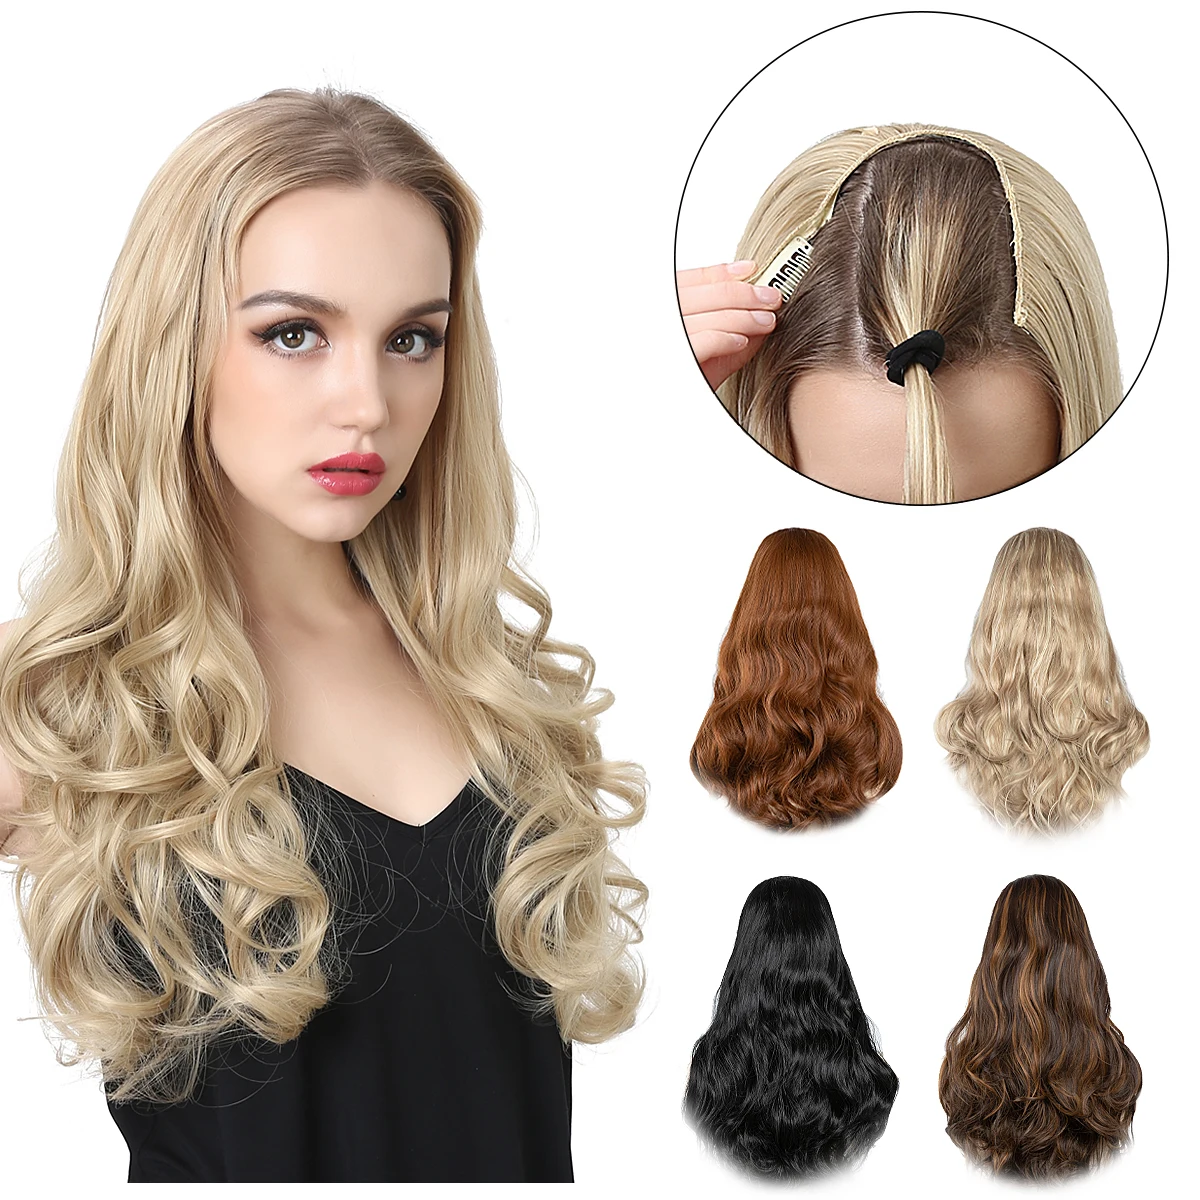 Synthetic Wavy U Part Wigs for Women  Clip in Hair Extension Invisible Half False Wig Long Blonde Black Natural Hairpieces